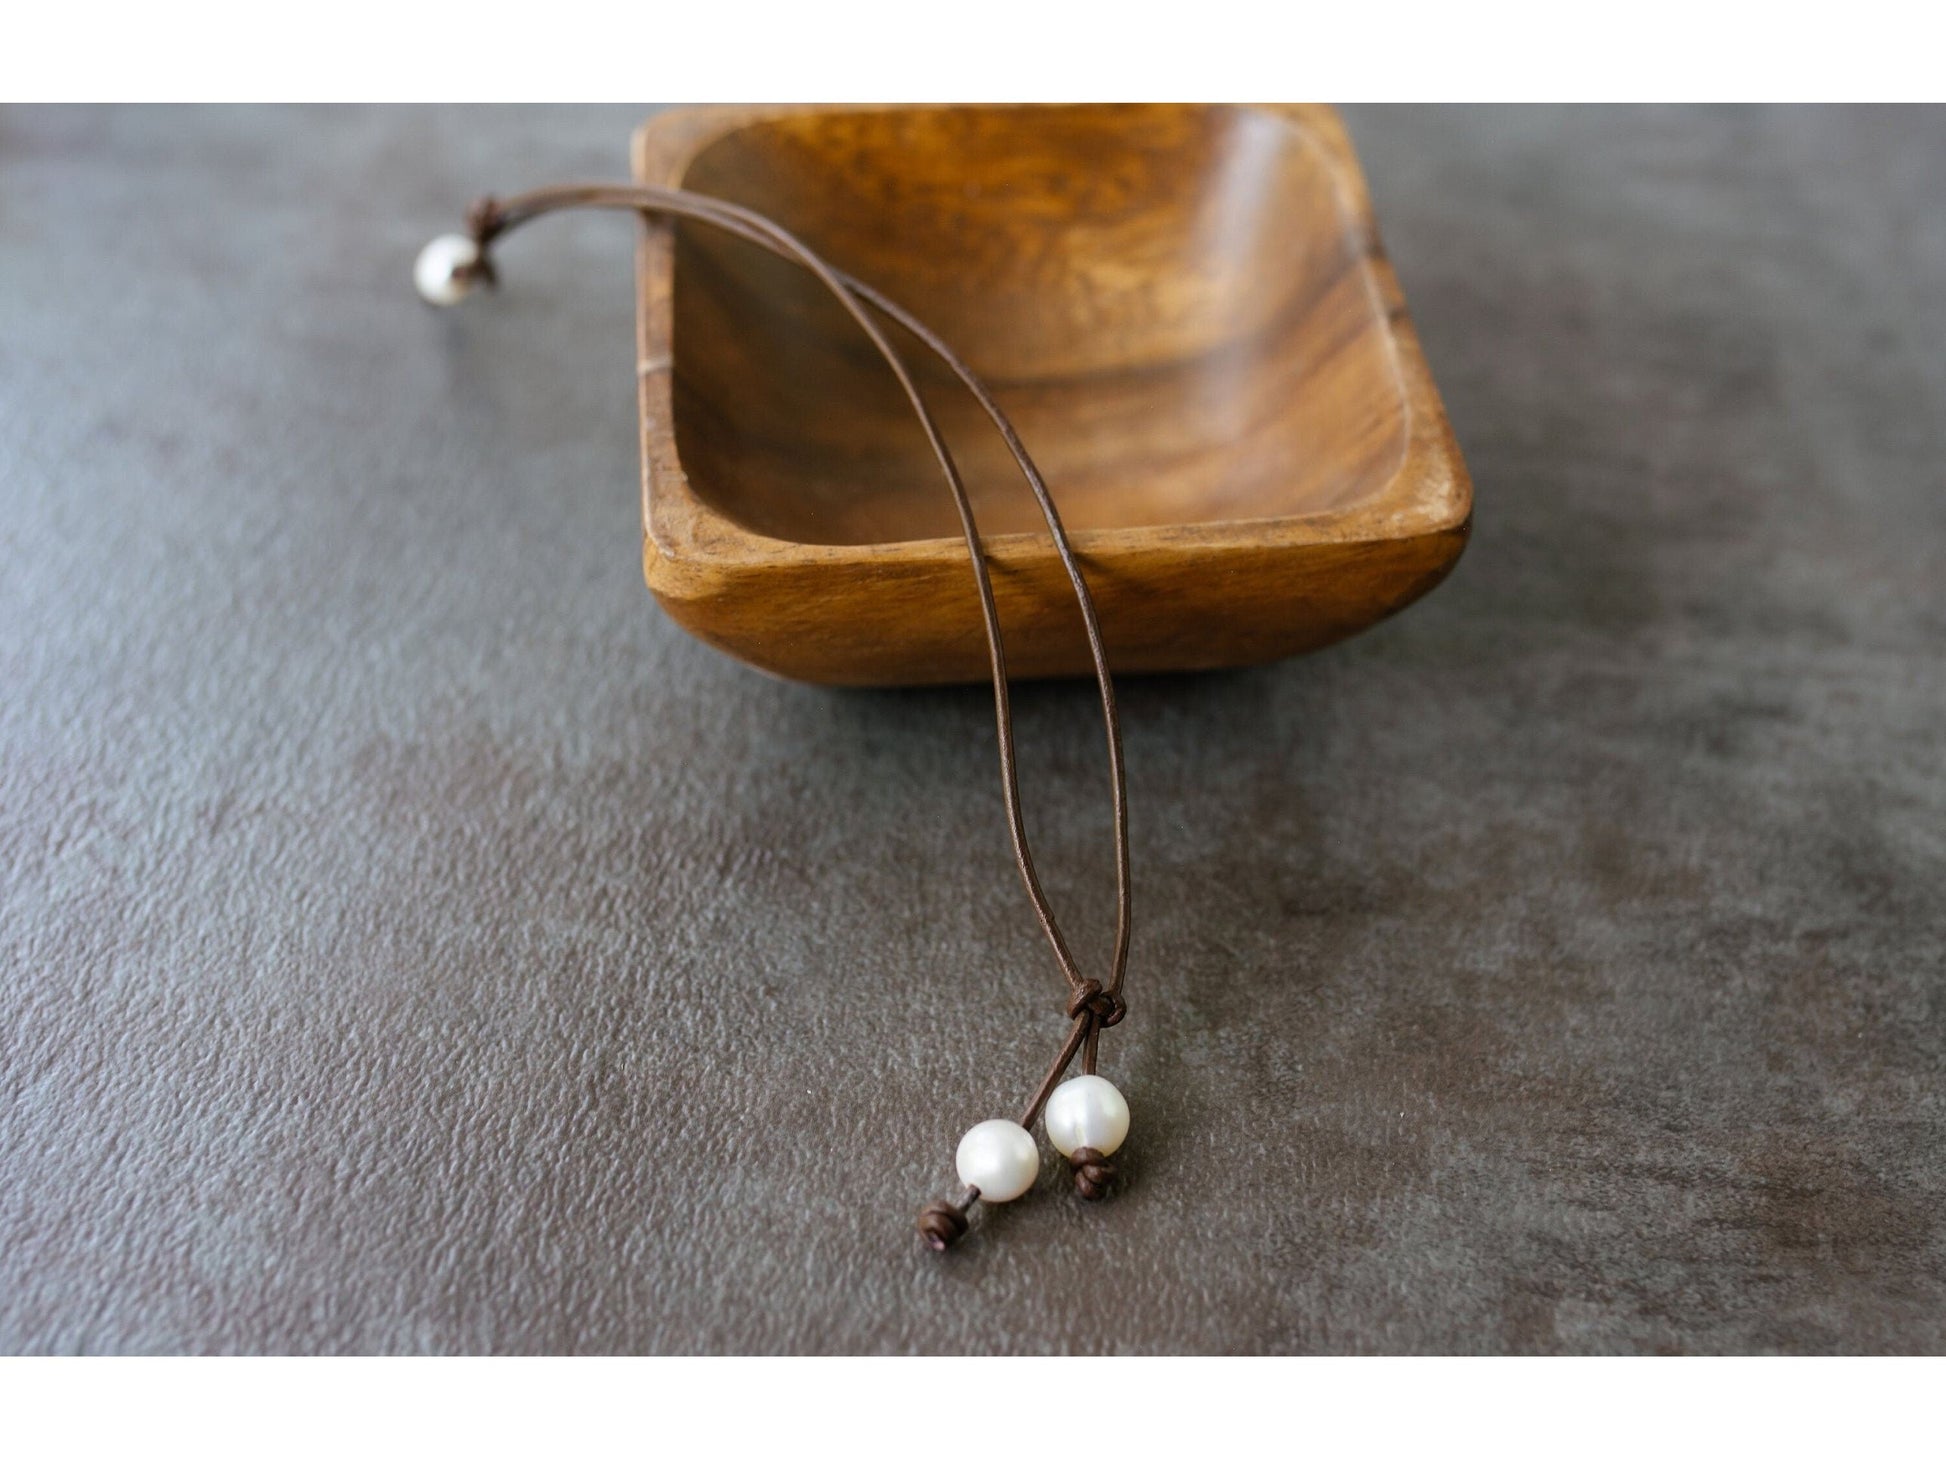 Leather pearl drop necklace, Summer Beach jewelry, 3rd anniversary gift for wife girlfriend,